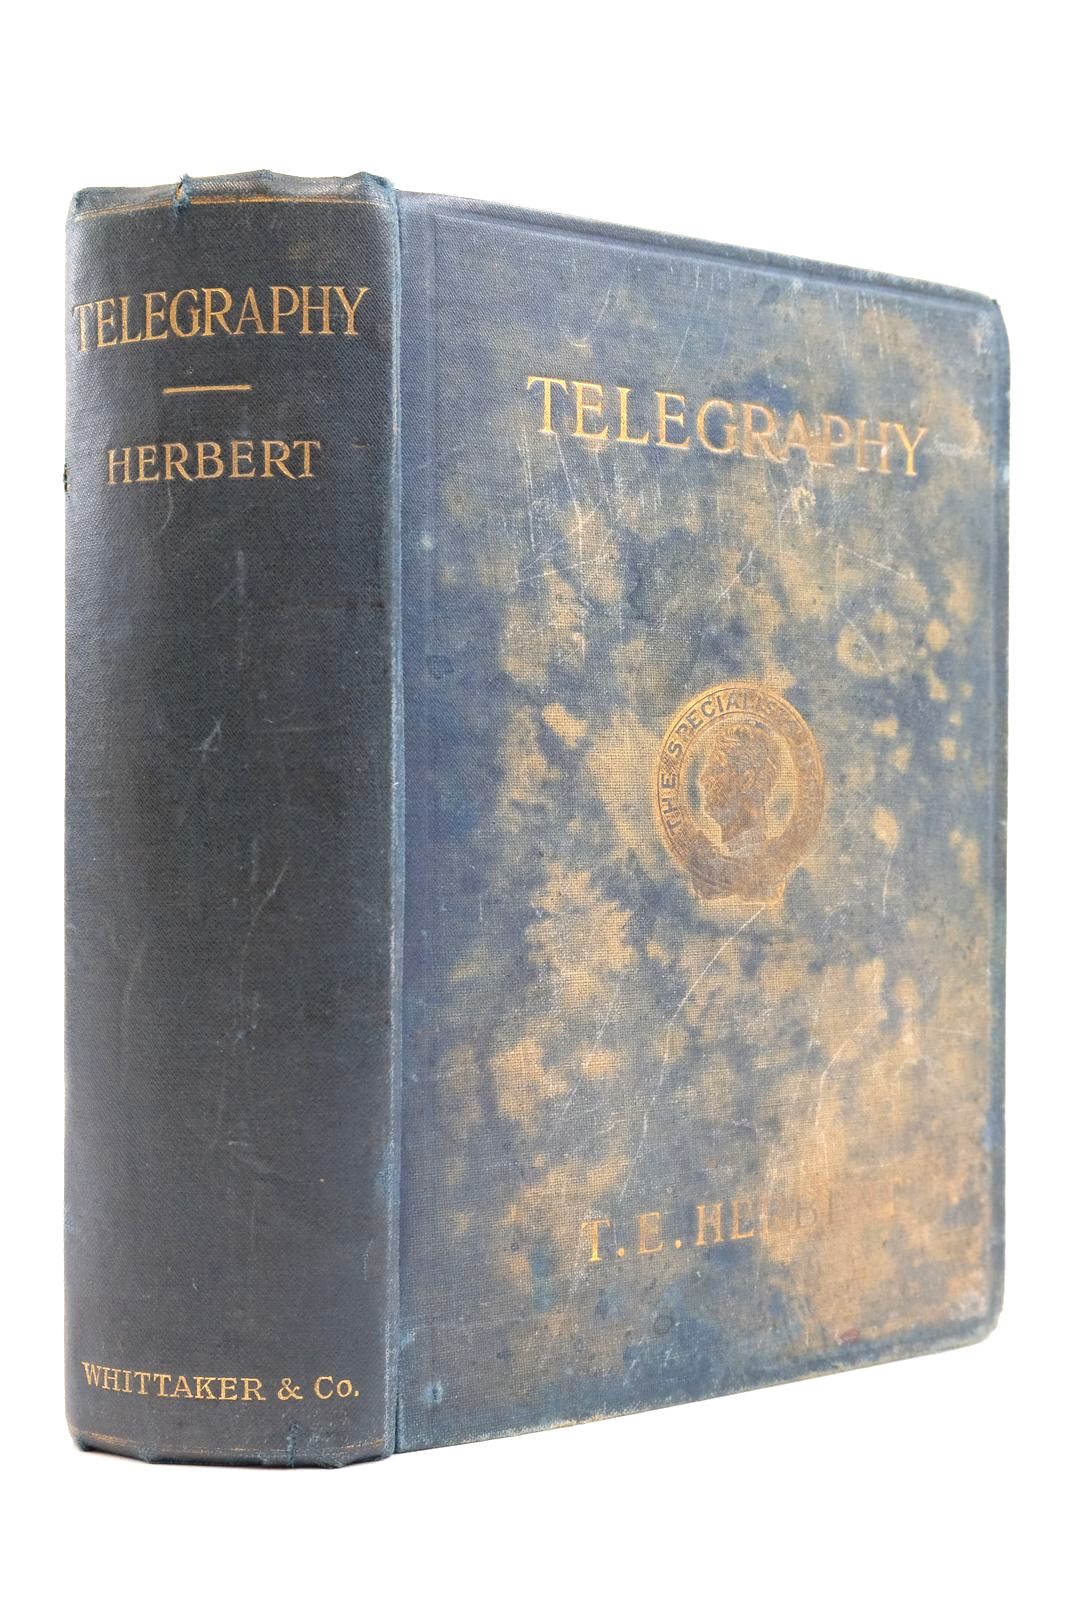 Photo of TELEGRAPHY: A DETAILED EXPOSITION OF THE TELEGRAPH SYSTEM OF THE BRITISH POST OFFICE written by Herbert, T.E. published by Whittaker & Co. (STOCK CODE: 2139056)  for sale by Stella & Rose's Books